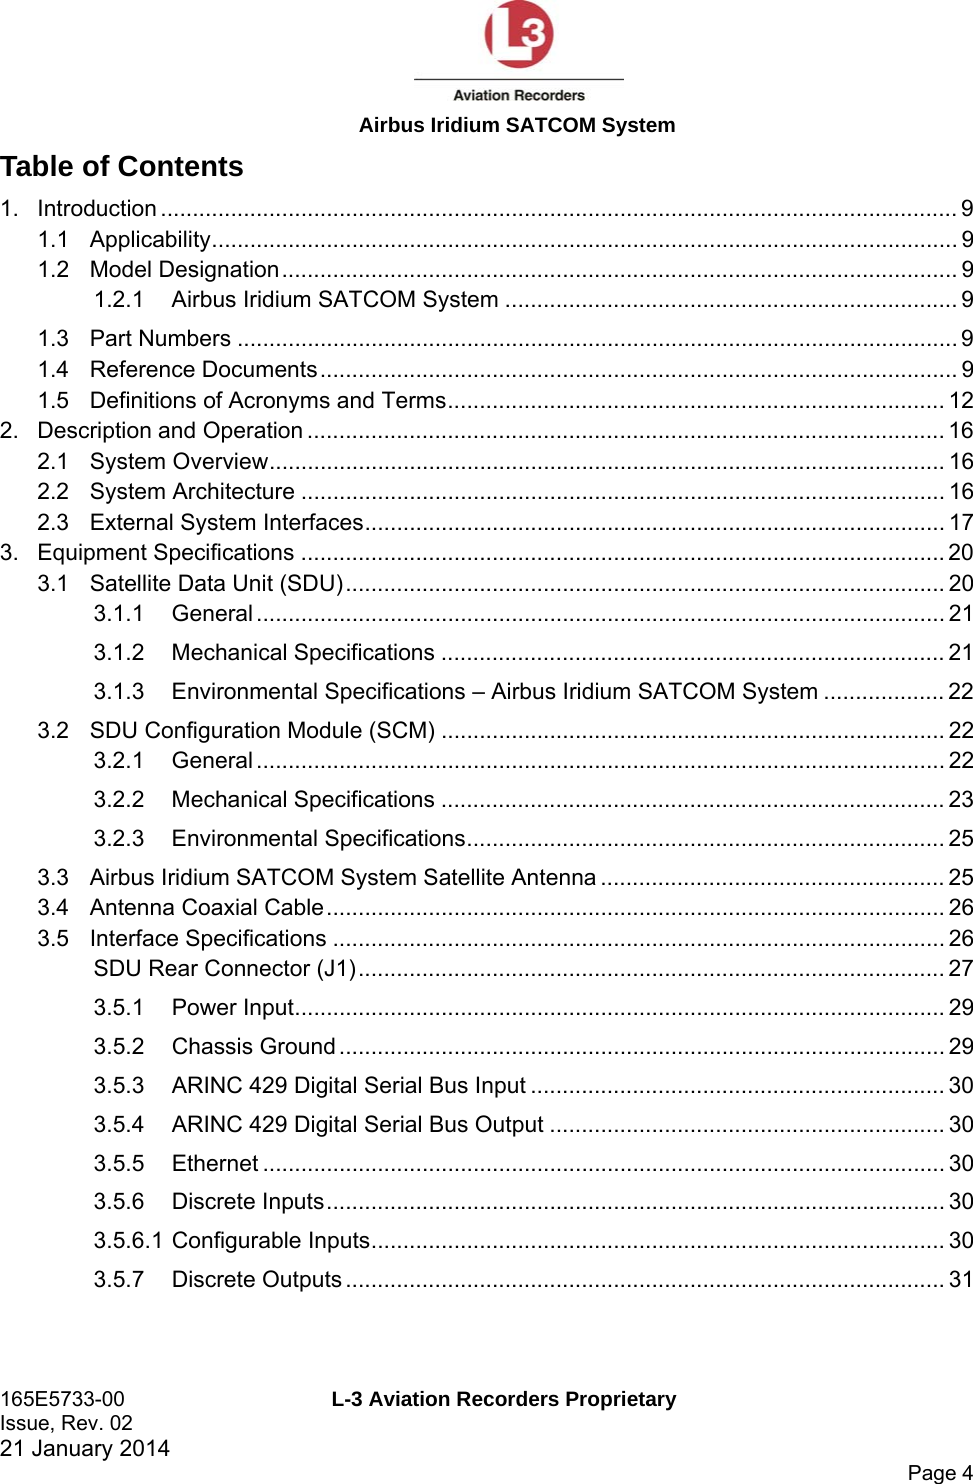  Airbus Iridium SATCOM System 165E5733-00  L-3 Aviation Recorders Proprietary Issue, Rev. 02   21 January 2014      Page 4 Table of Contents 1.Introduction ............................................................................................................................. 91.1Applicability ..................................................................................................................... 91.2Model Designation .......................................................................................................... 91.2.1Airbus Iridium SATCOM System ....................................................................... 91.3Part Numbers ................................................................................................................. 91.4Reference Documents .................................................................................................... 91.5Definitions of Acronyms and Terms .............................................................................. 122.Description and Operation .................................................................................................... 162.1System Overview .......................................................................................................... 162.2System Architecture ..................................................................................................... 162.3External System Interfaces ........................................................................................... 173.Equipment Specifications ..................................................................................................... 203.1Satellite Data Unit (SDU) .............................................................................................. 203.1.1General ............................................................................................................ 213.1.2Mechanical Specifications ............................................................................... 213.1.3Environmental Specifications – Airbus Iridium SATCOM System ................... 223.2SDU Configuration Module (SCM) ............................................................................... 223.2.1General ............................................................................................................ 223.2.2Mechanical Specifications ............................................................................... 233.2.3Environmental Specifications ........................................................................... 253.3Airbus Iridium SATCOM System Satellite Antenna ...................................................... 253.4Antenna Coaxial Cable ................................................................................................. 263.5Interface Specifications ................................................................................................ 26SDU Rear Connector (J1) ............................................................................................ 273.5.1Power Input ...................................................................................................... 293.5.2Chassis Ground ............................................................................................... 293.5.3ARINC 429 Digital Serial Bus Input ................................................................. 303.5.4ARINC 429 Digital Serial Bus Output .............................................................. 303.5.5Ethernet ........................................................................................................... 303.5.6Discrete Inputs ................................................................................................. 303.5.6.1Configurable Inputs .......................................................................................... 30 3.5.7Discrete Outputs .............................................................................................. 31 